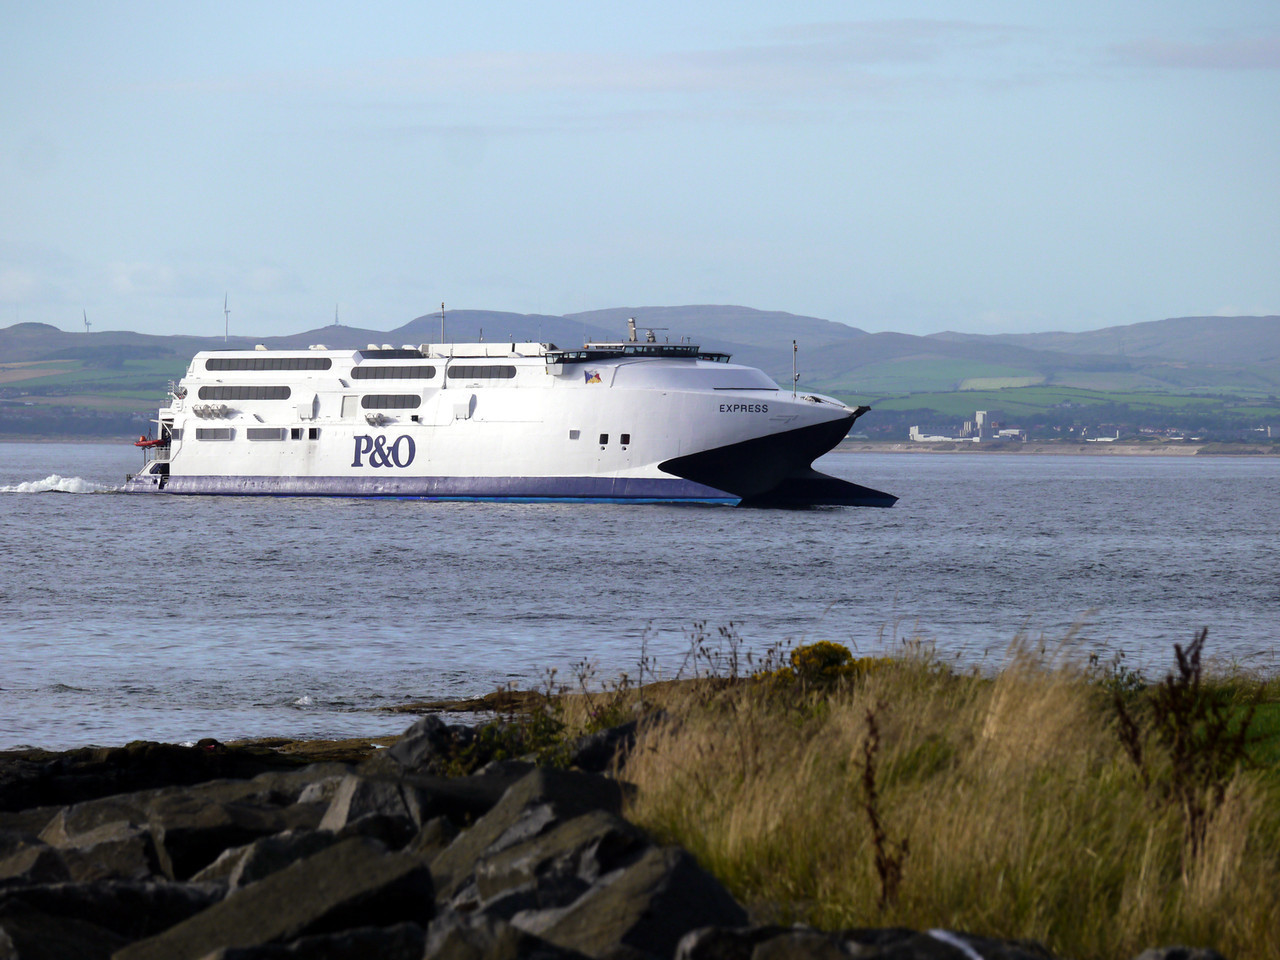 The Troon to Larne ferry service